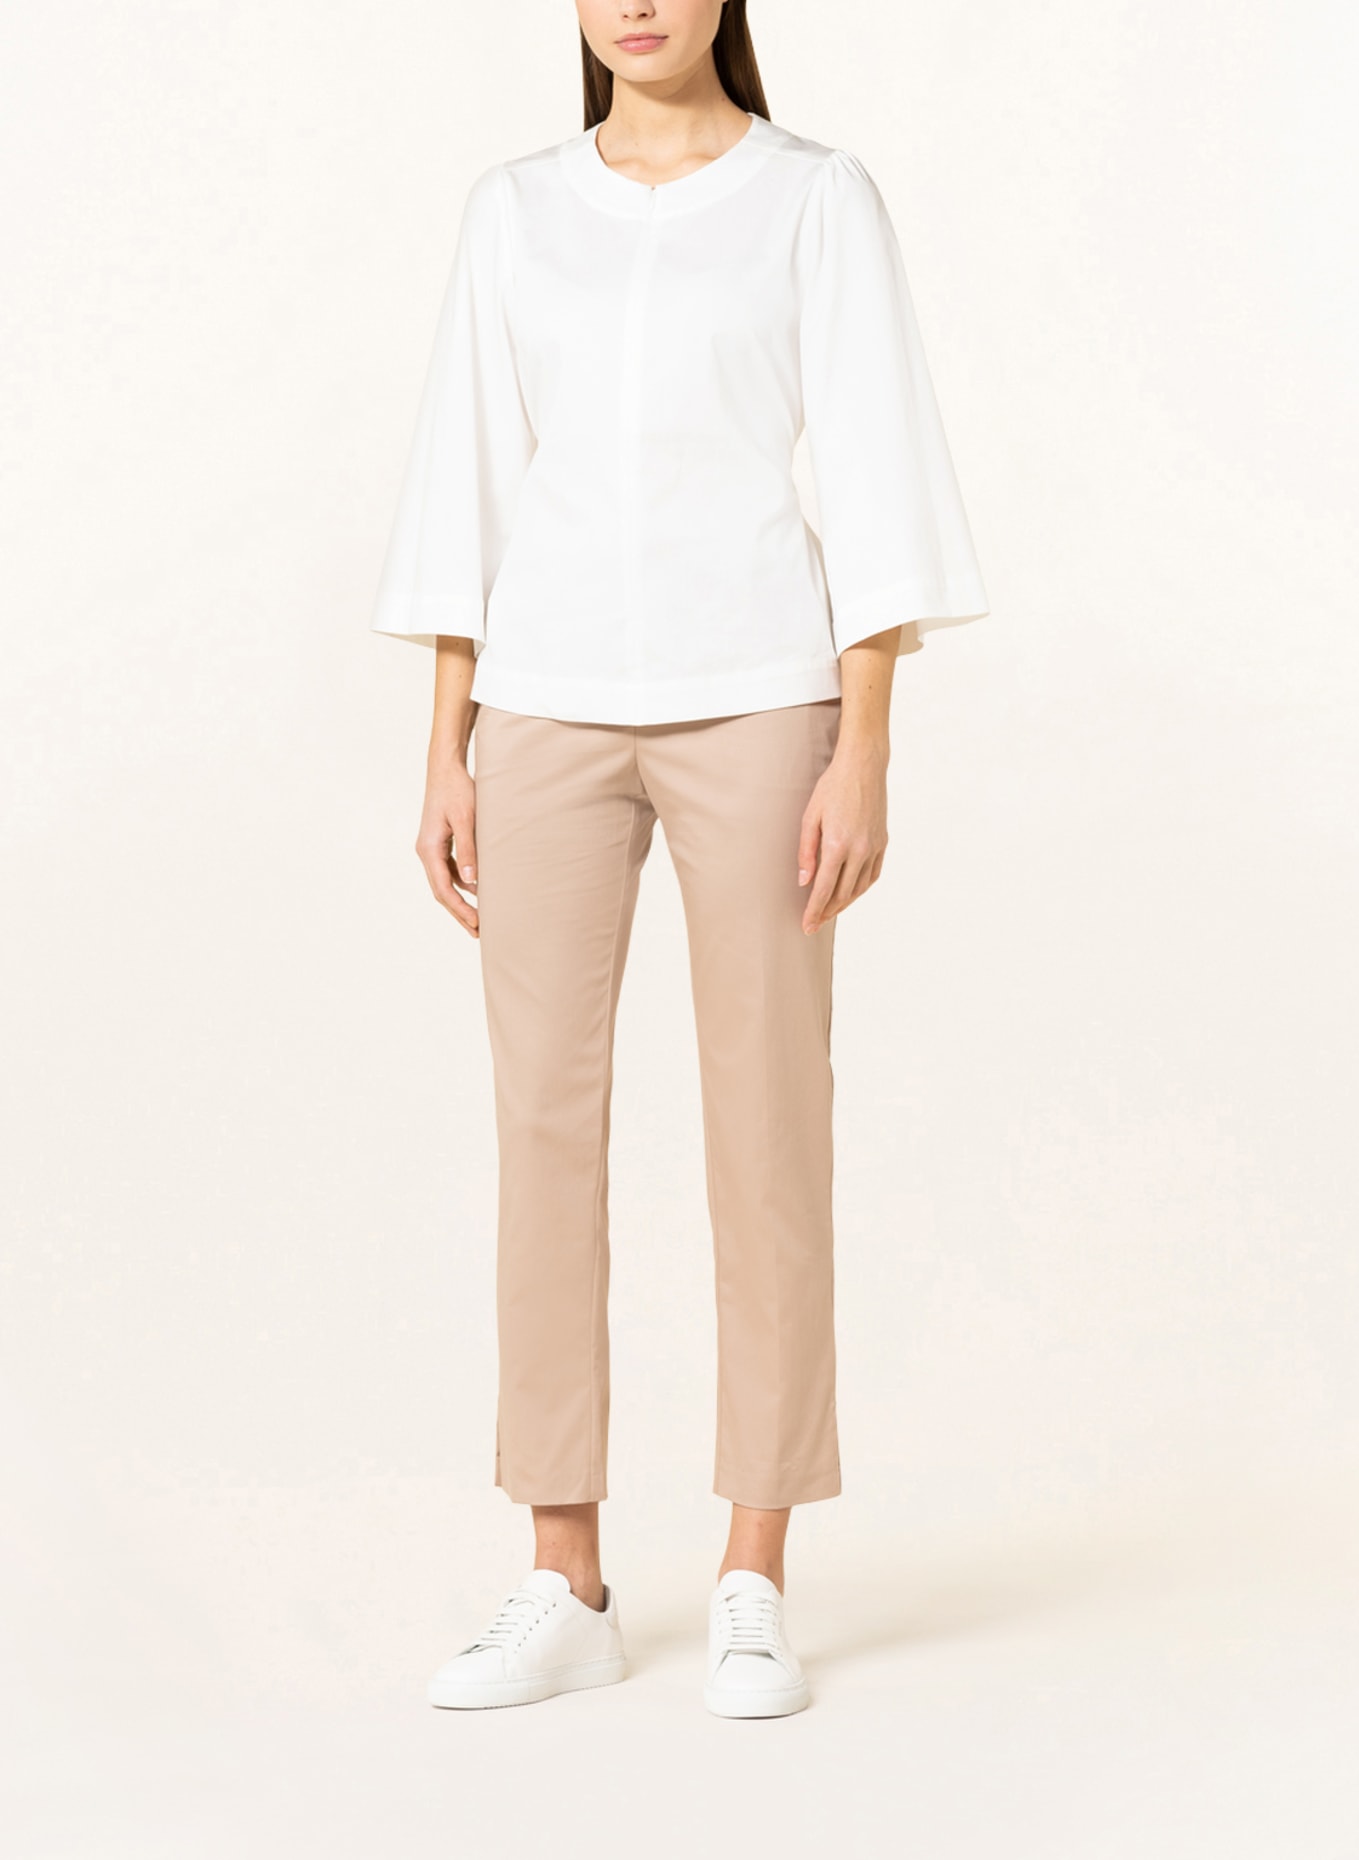 MARC CAIN Shirt blouse with 3/4 sleeves, Color: 110 off (Image 2)